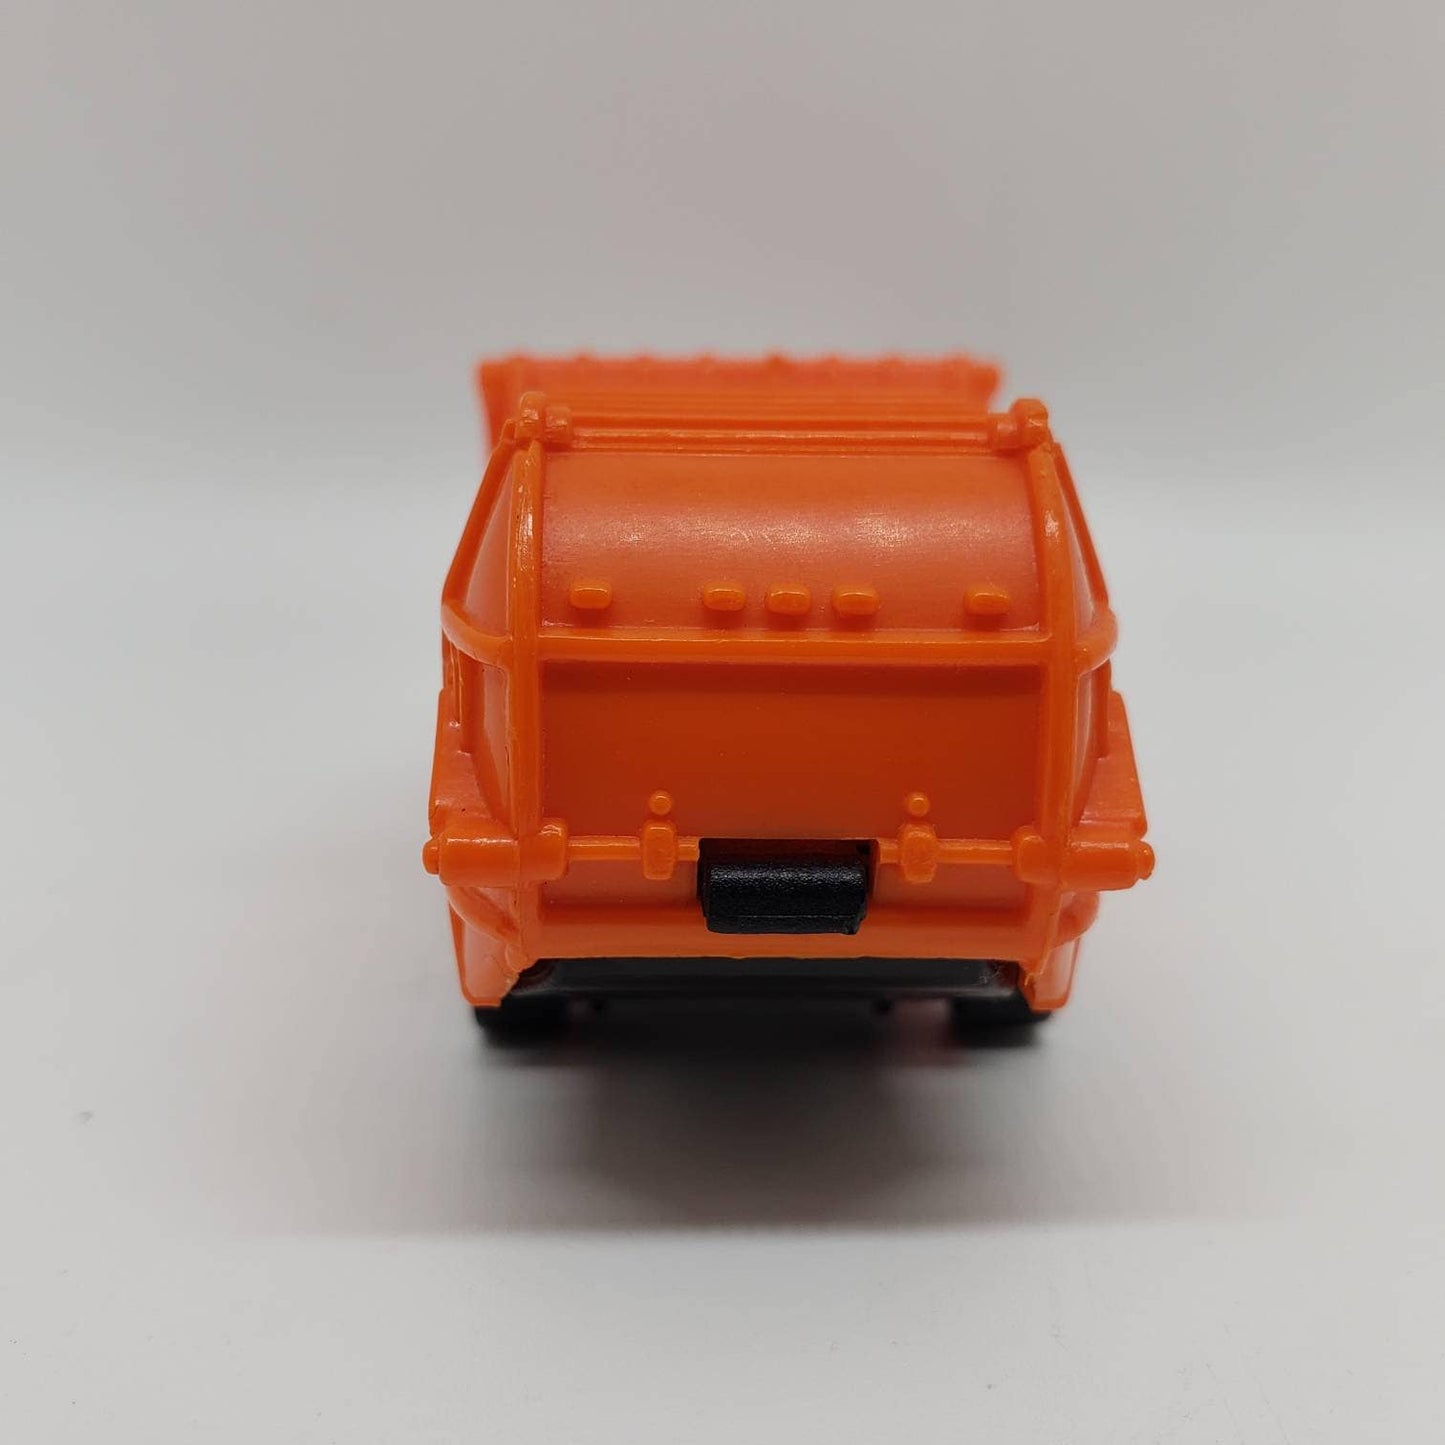 Recycling Truck - Recycler - Diecast Vintage - Diecast Collectible - Miniature Model Toy Car - Hot Wheels Car - Hot Wheels